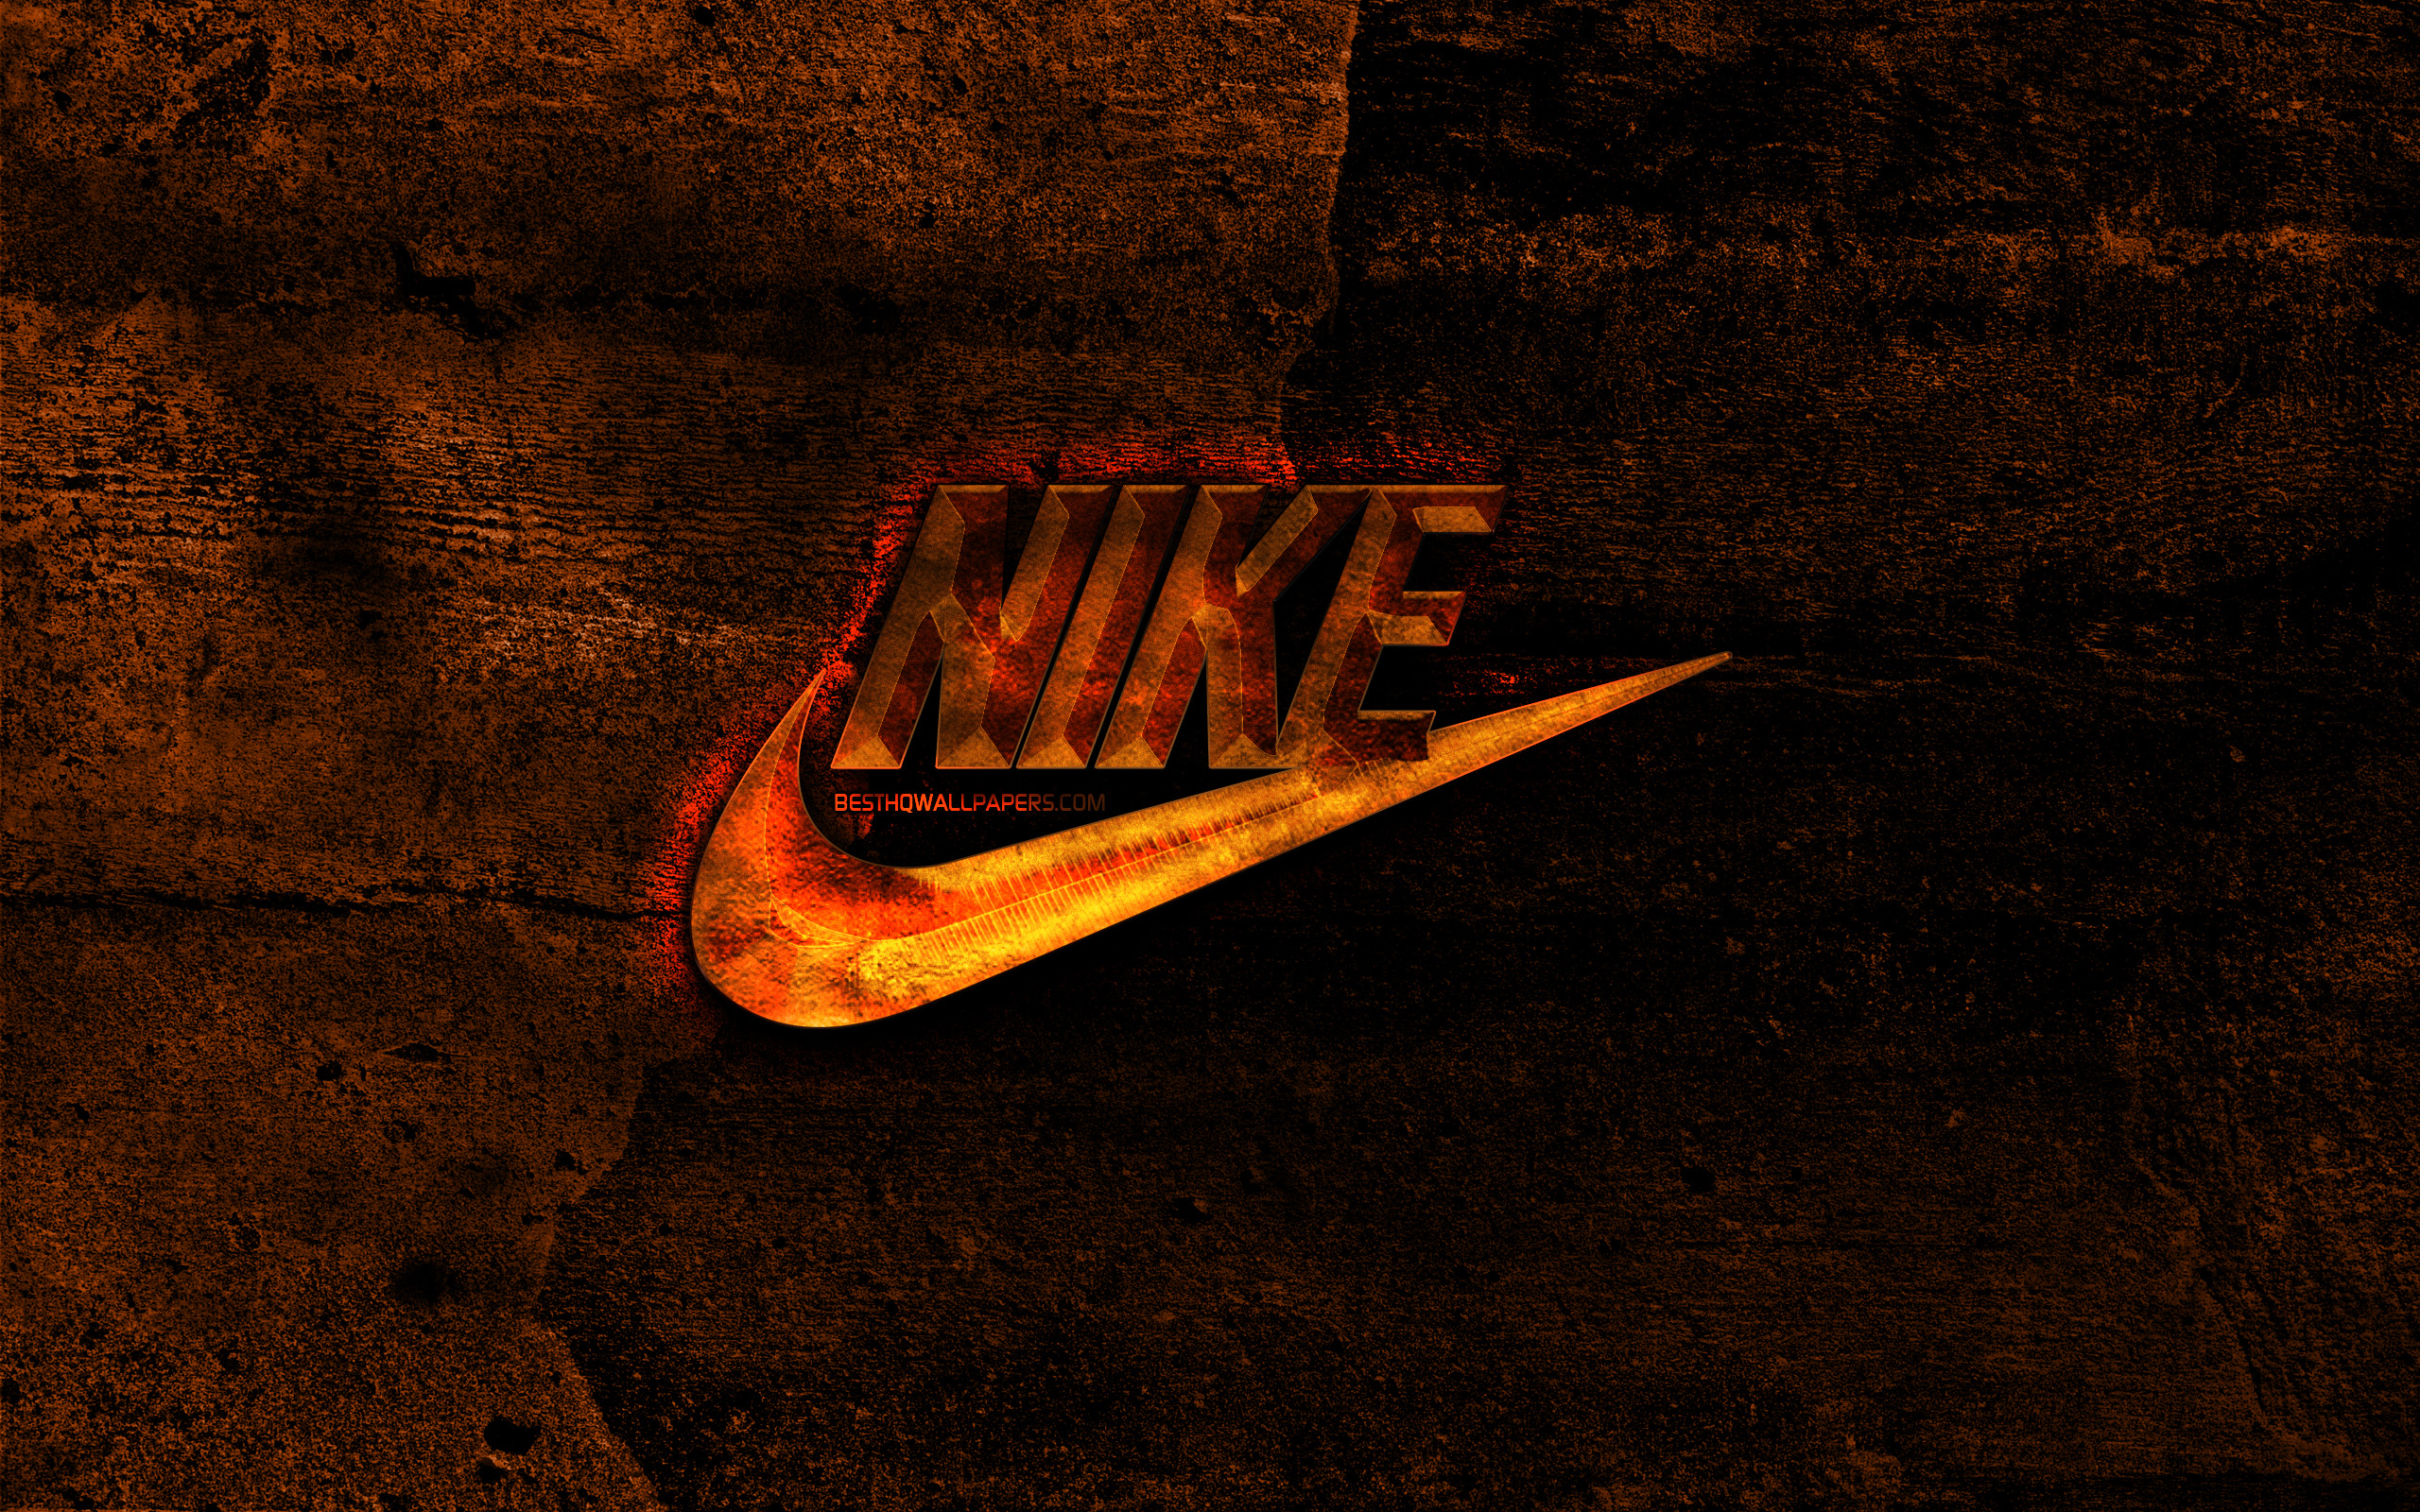 Download wallpaper Nike fiery logo, orange stone background, Nike, creative, Nike logo, brands for desktop with resolution 2560x1600. High Quality HD picture wallpaper